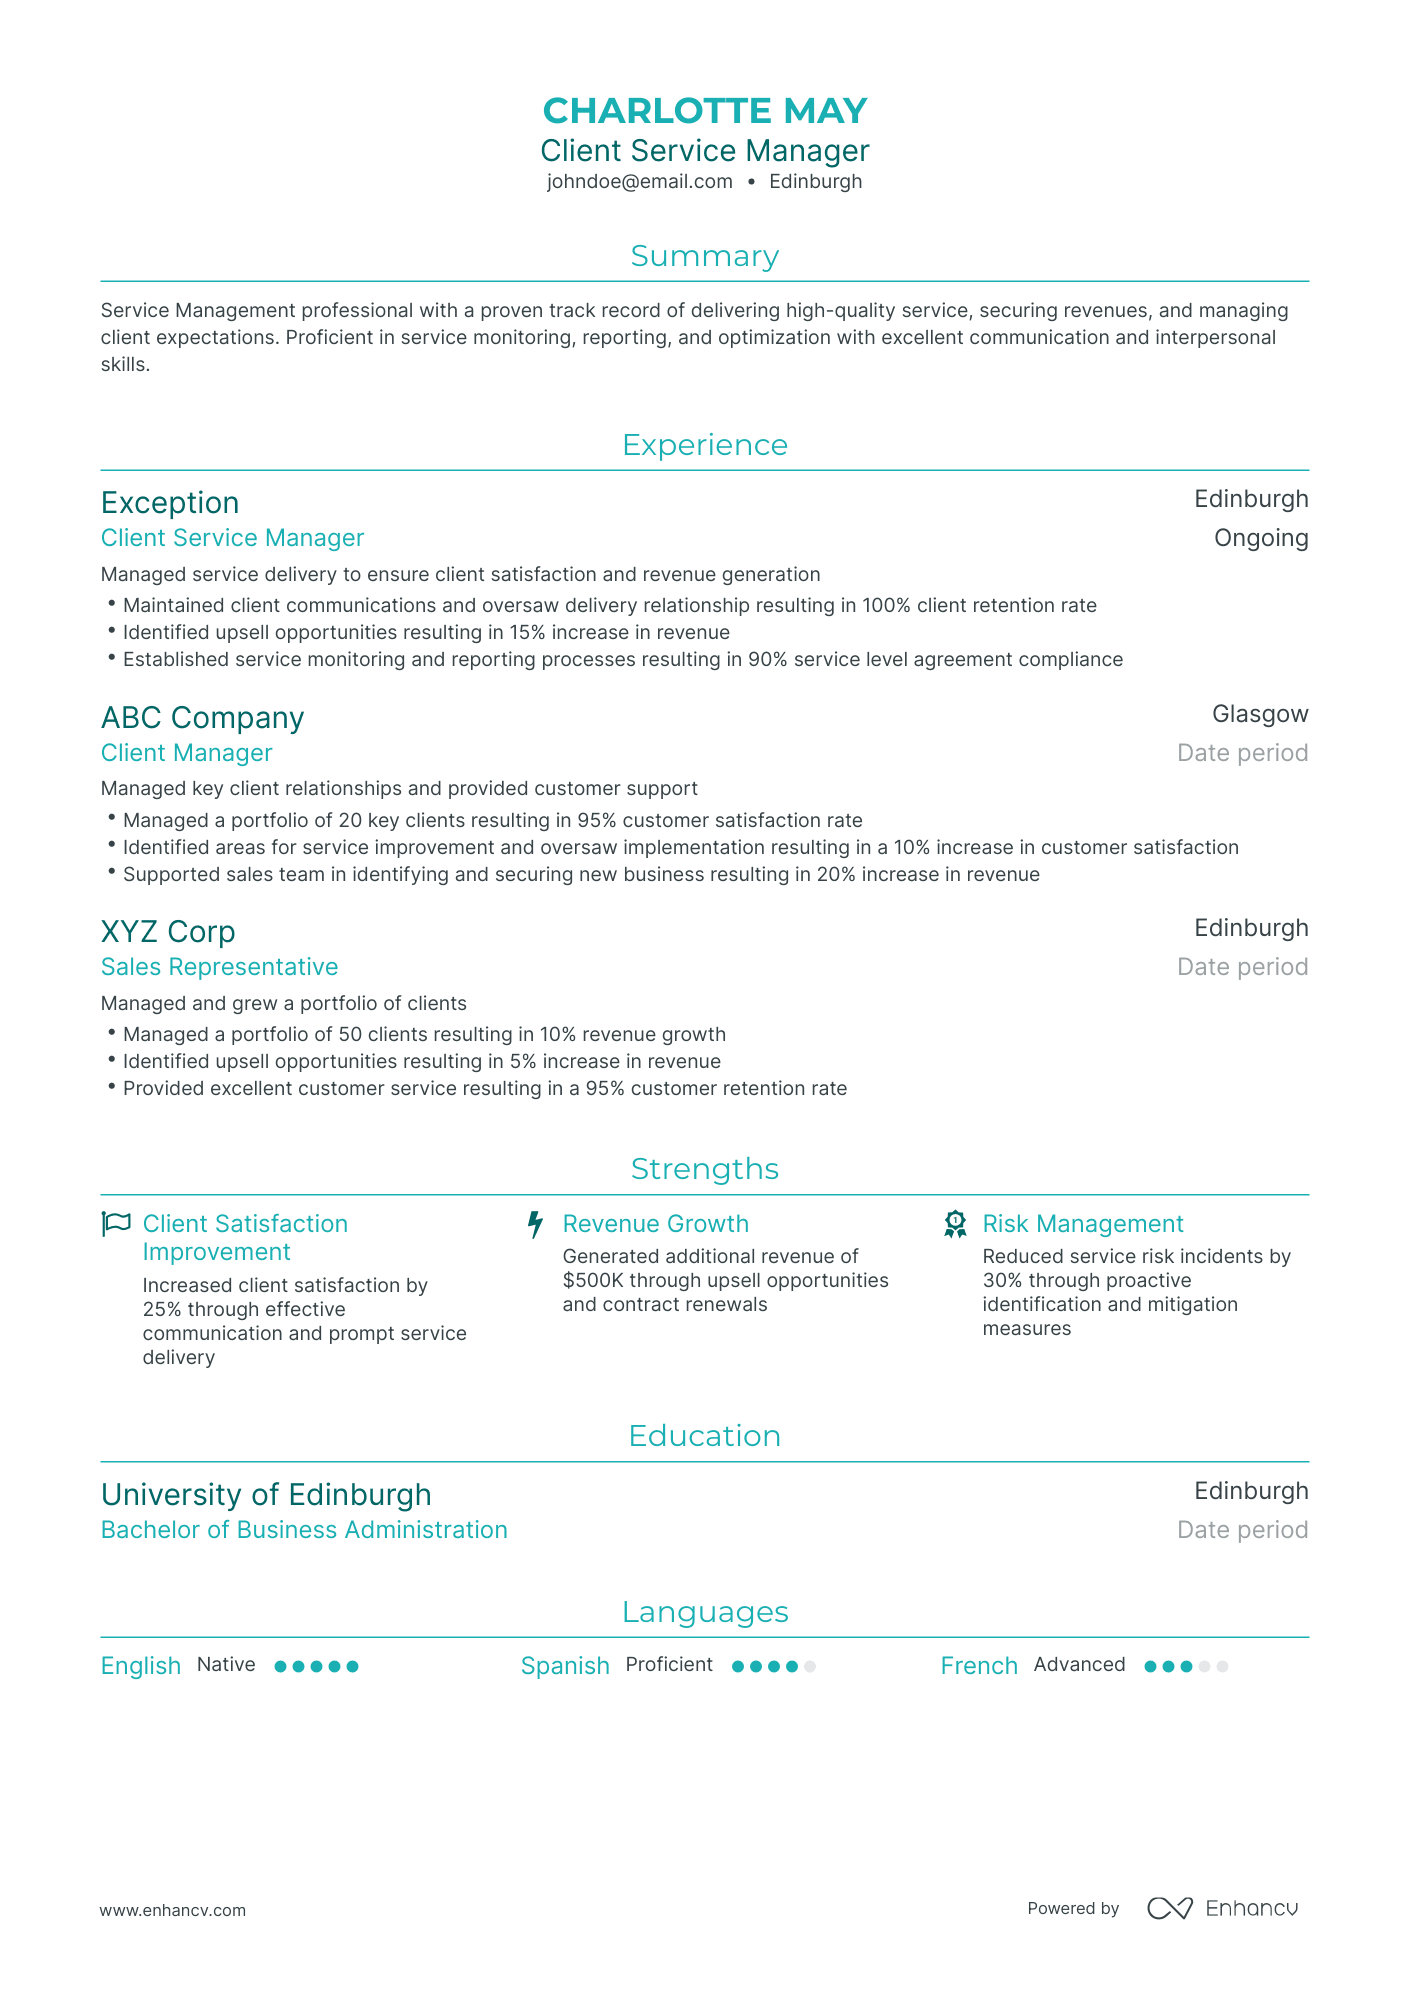 Traditional Client Service Manager Resume Template